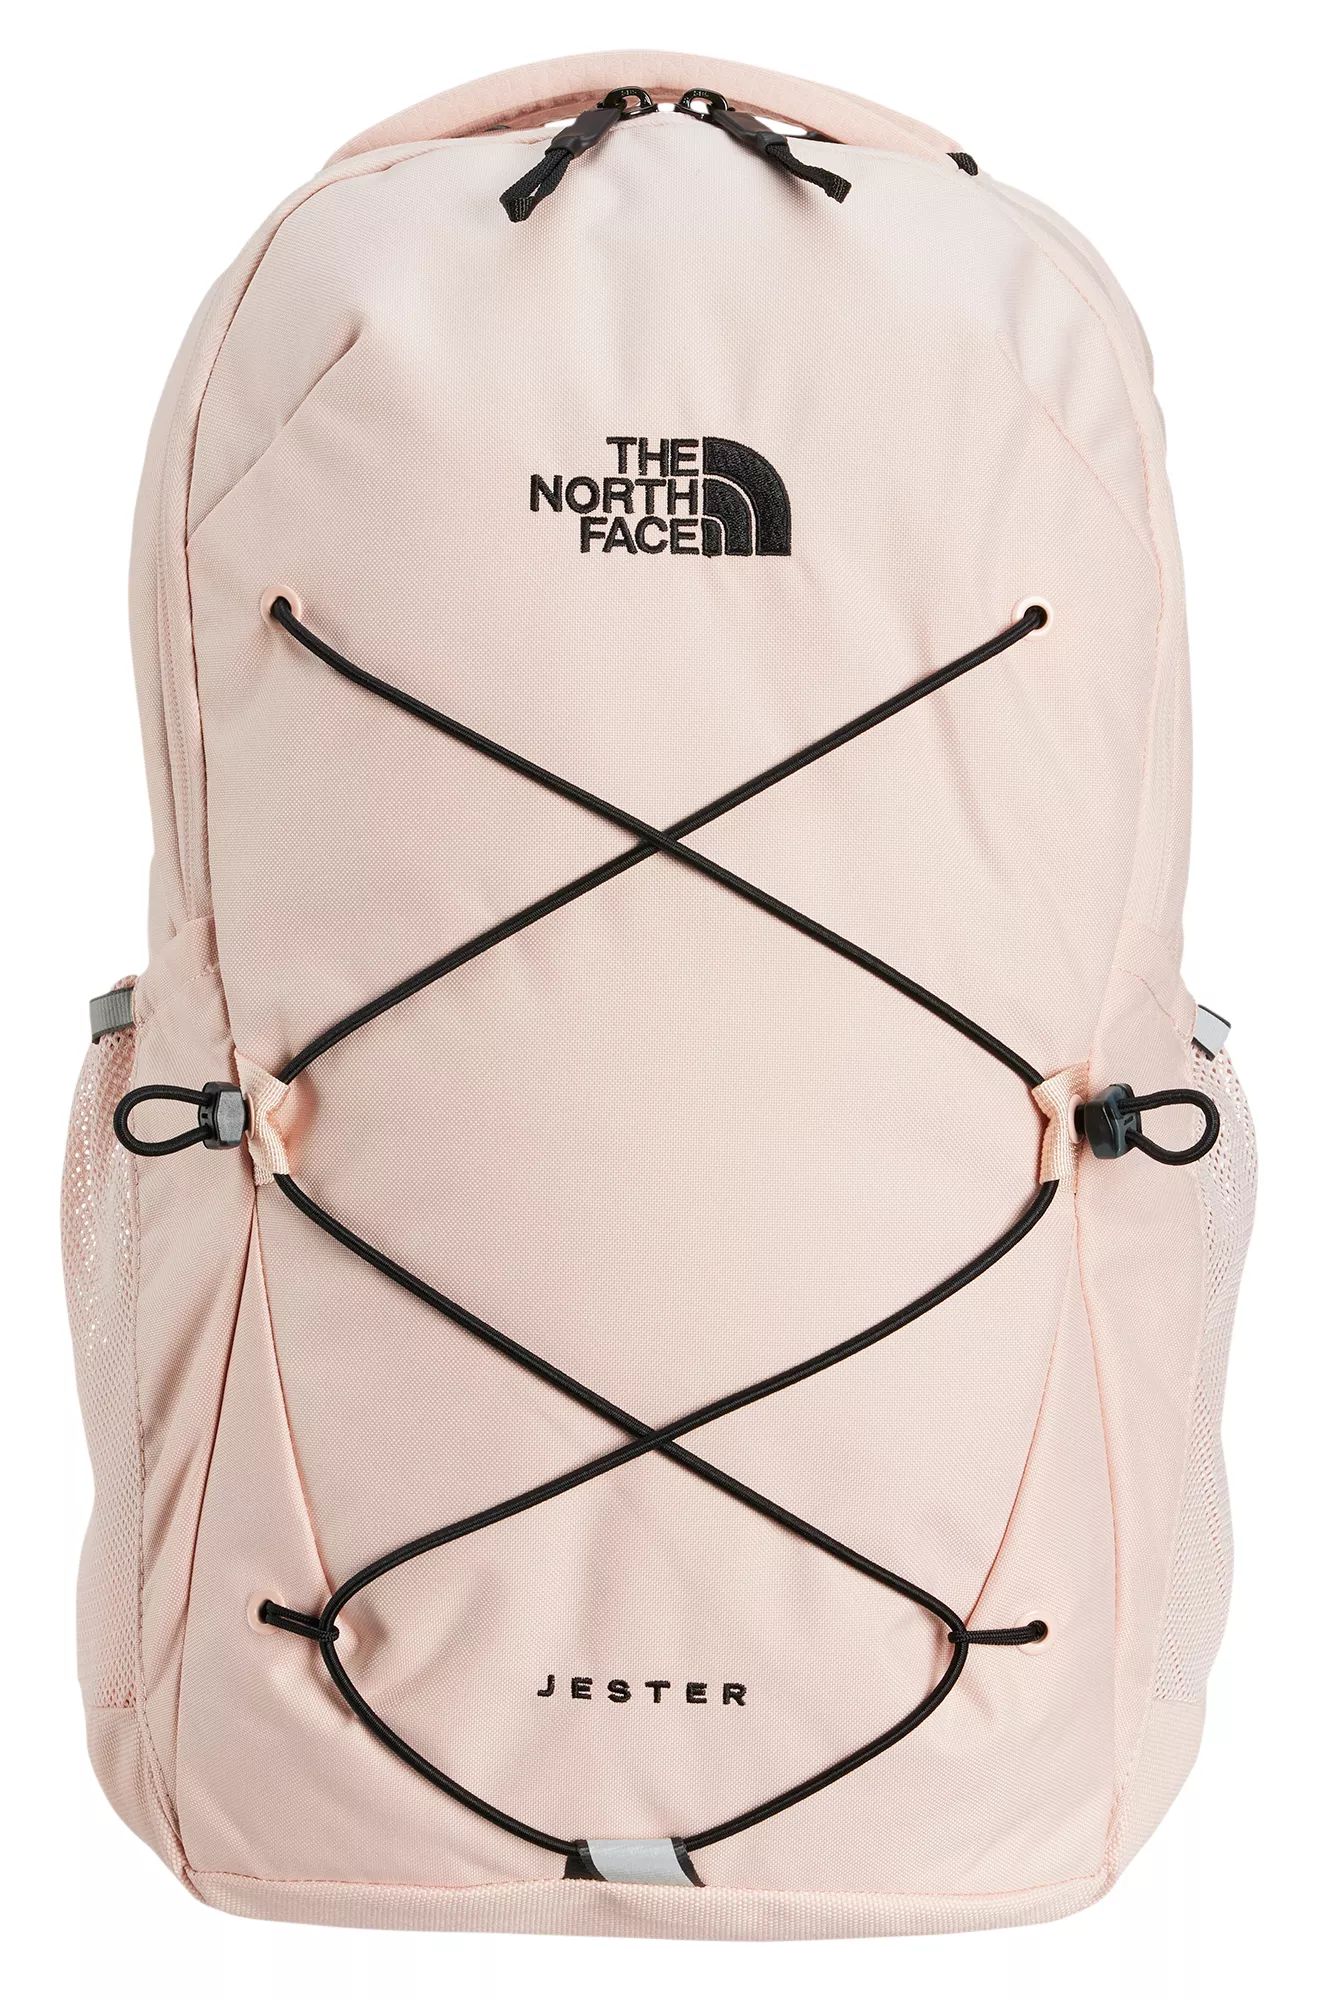 The North Face Women's Jester Backpack, Evening Sand Pink/TNF Bla | Dick's Sporting Goods